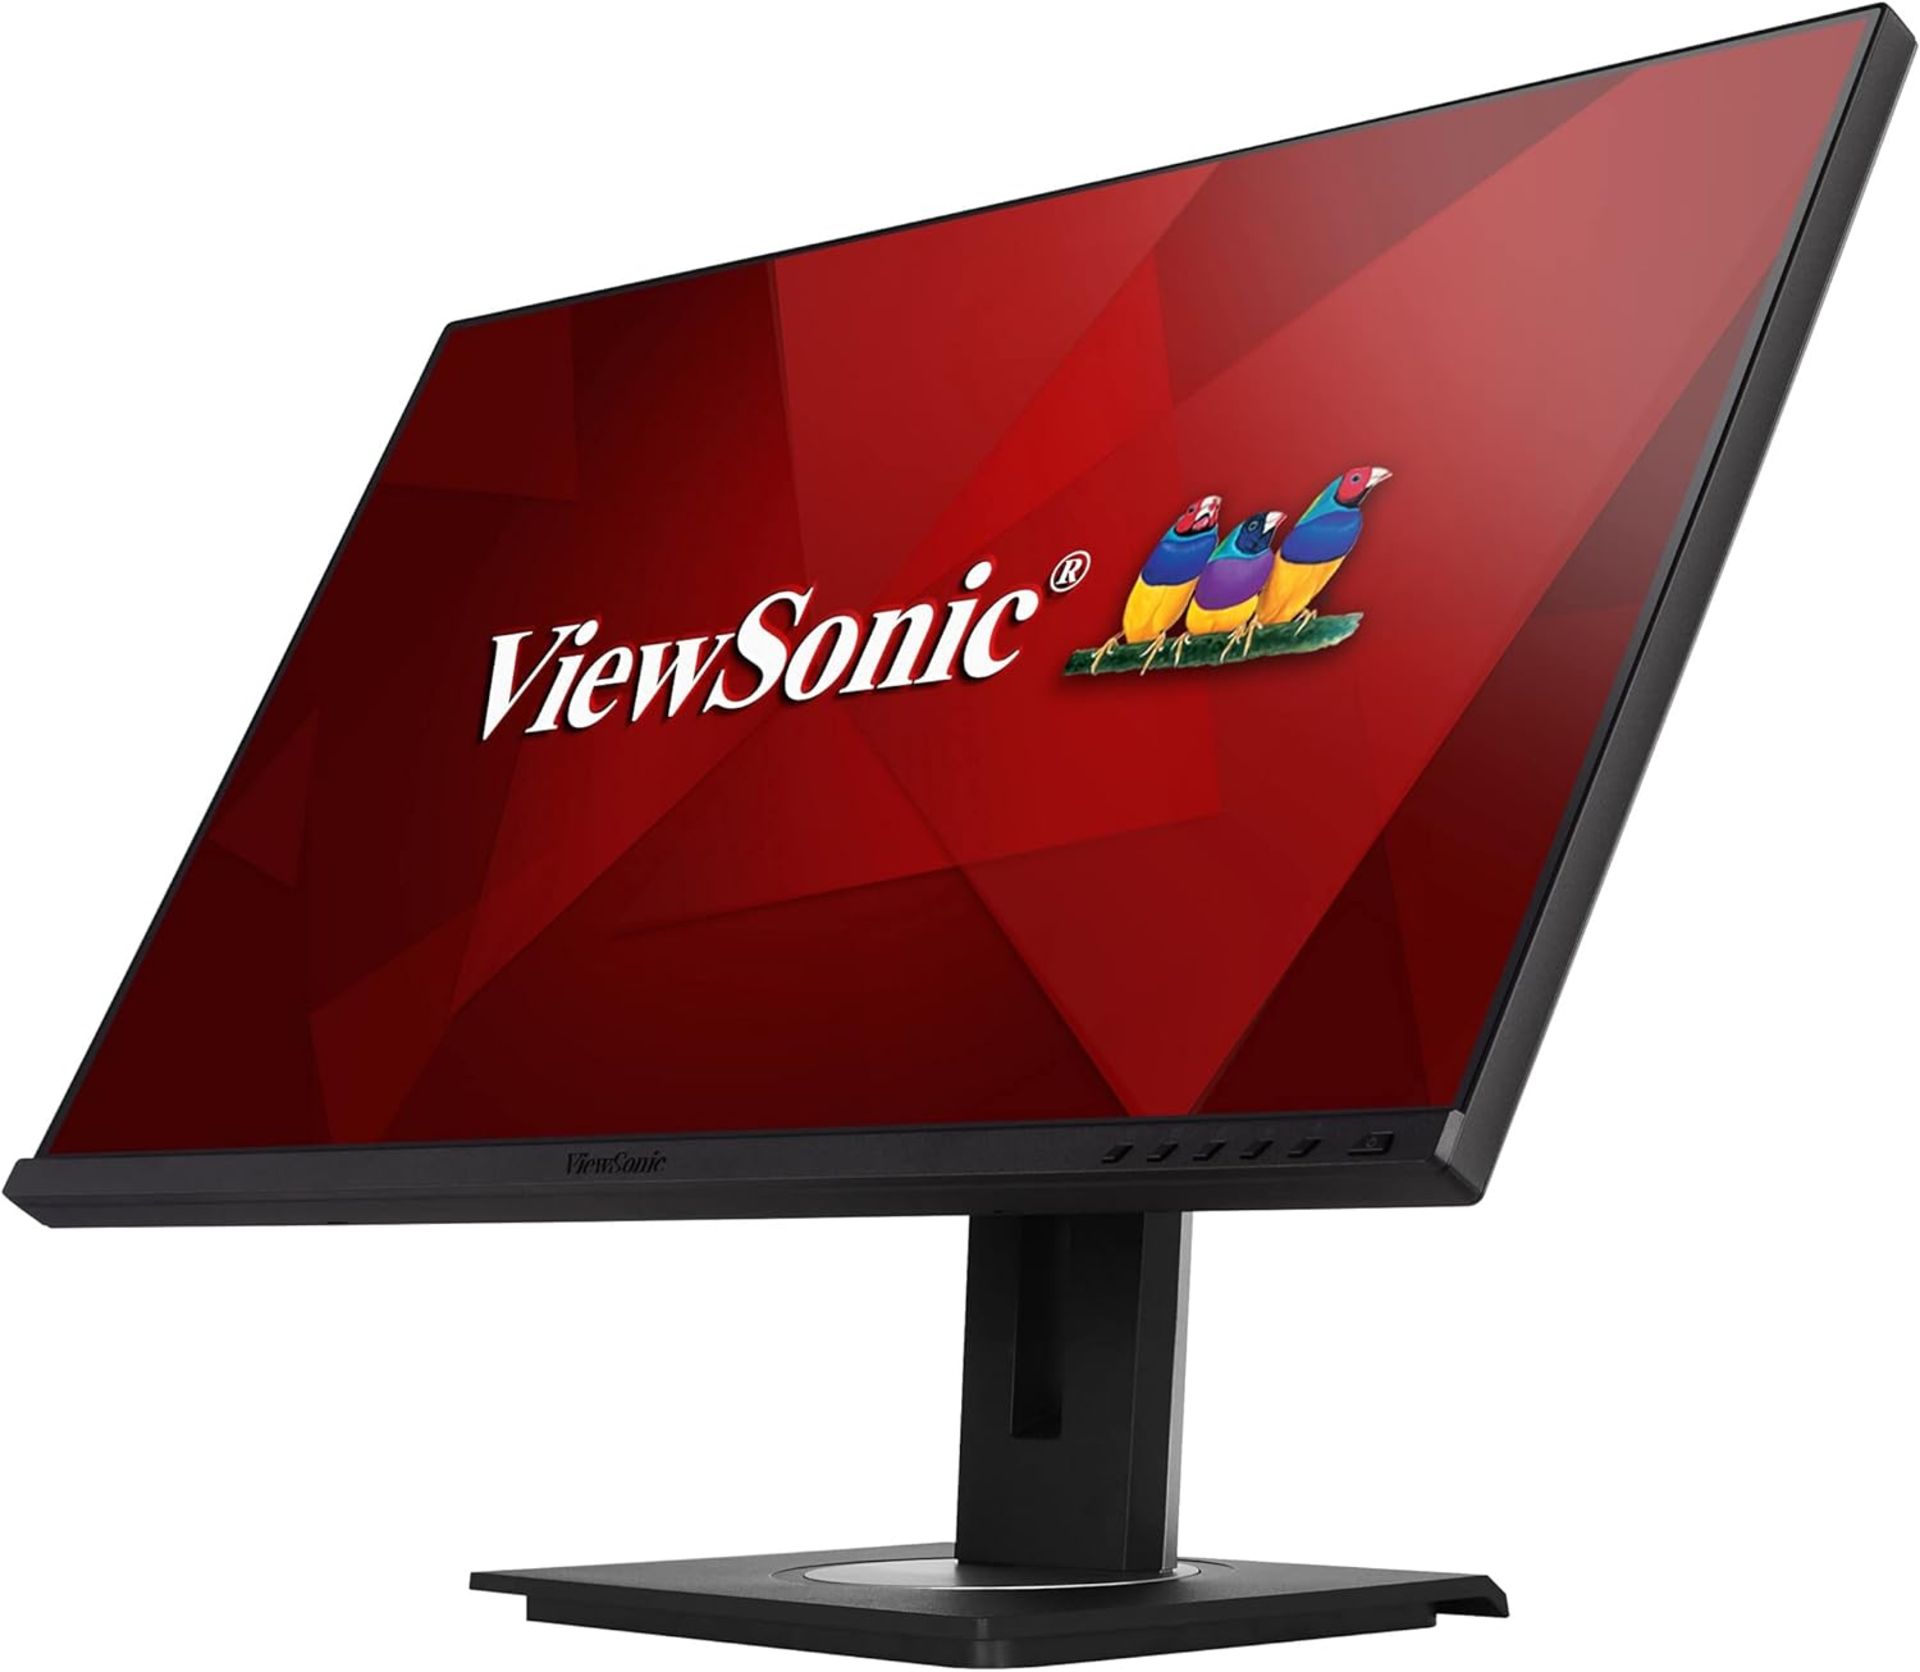 VIEWSONIC VG2755 27 Inch IPS Full HD Ergonomic Monitor. RRP £175. (PCKBW). IDEAL FOR WORK & STUDY AT - Image 3 of 6